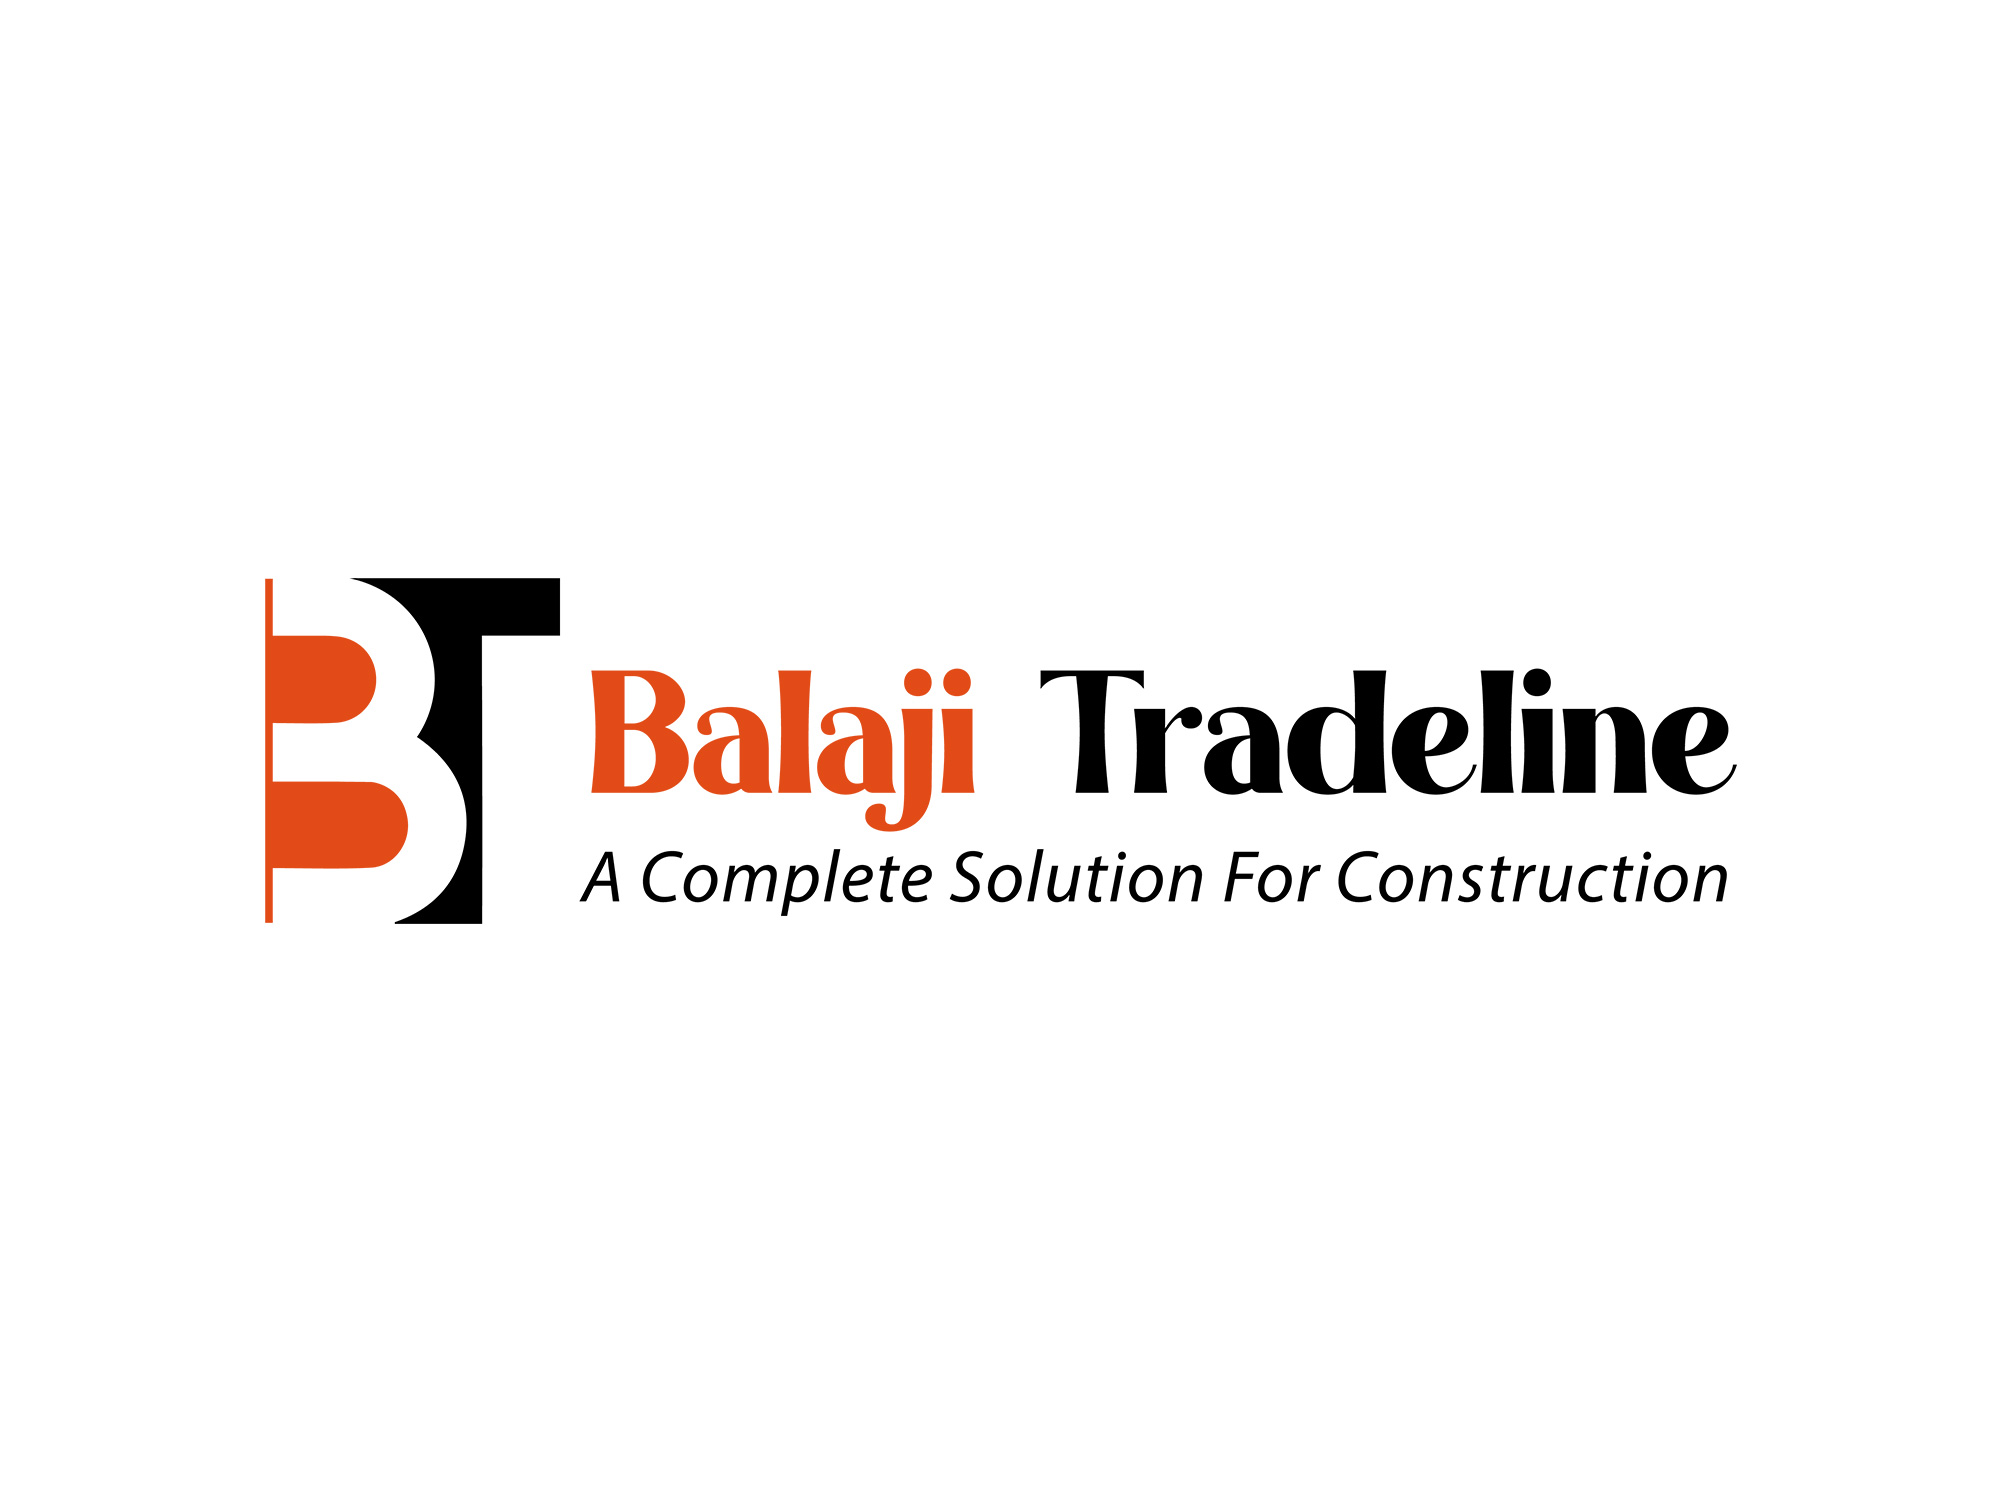 Balaji Tradelines 2d - xpertlab technologies privater limited